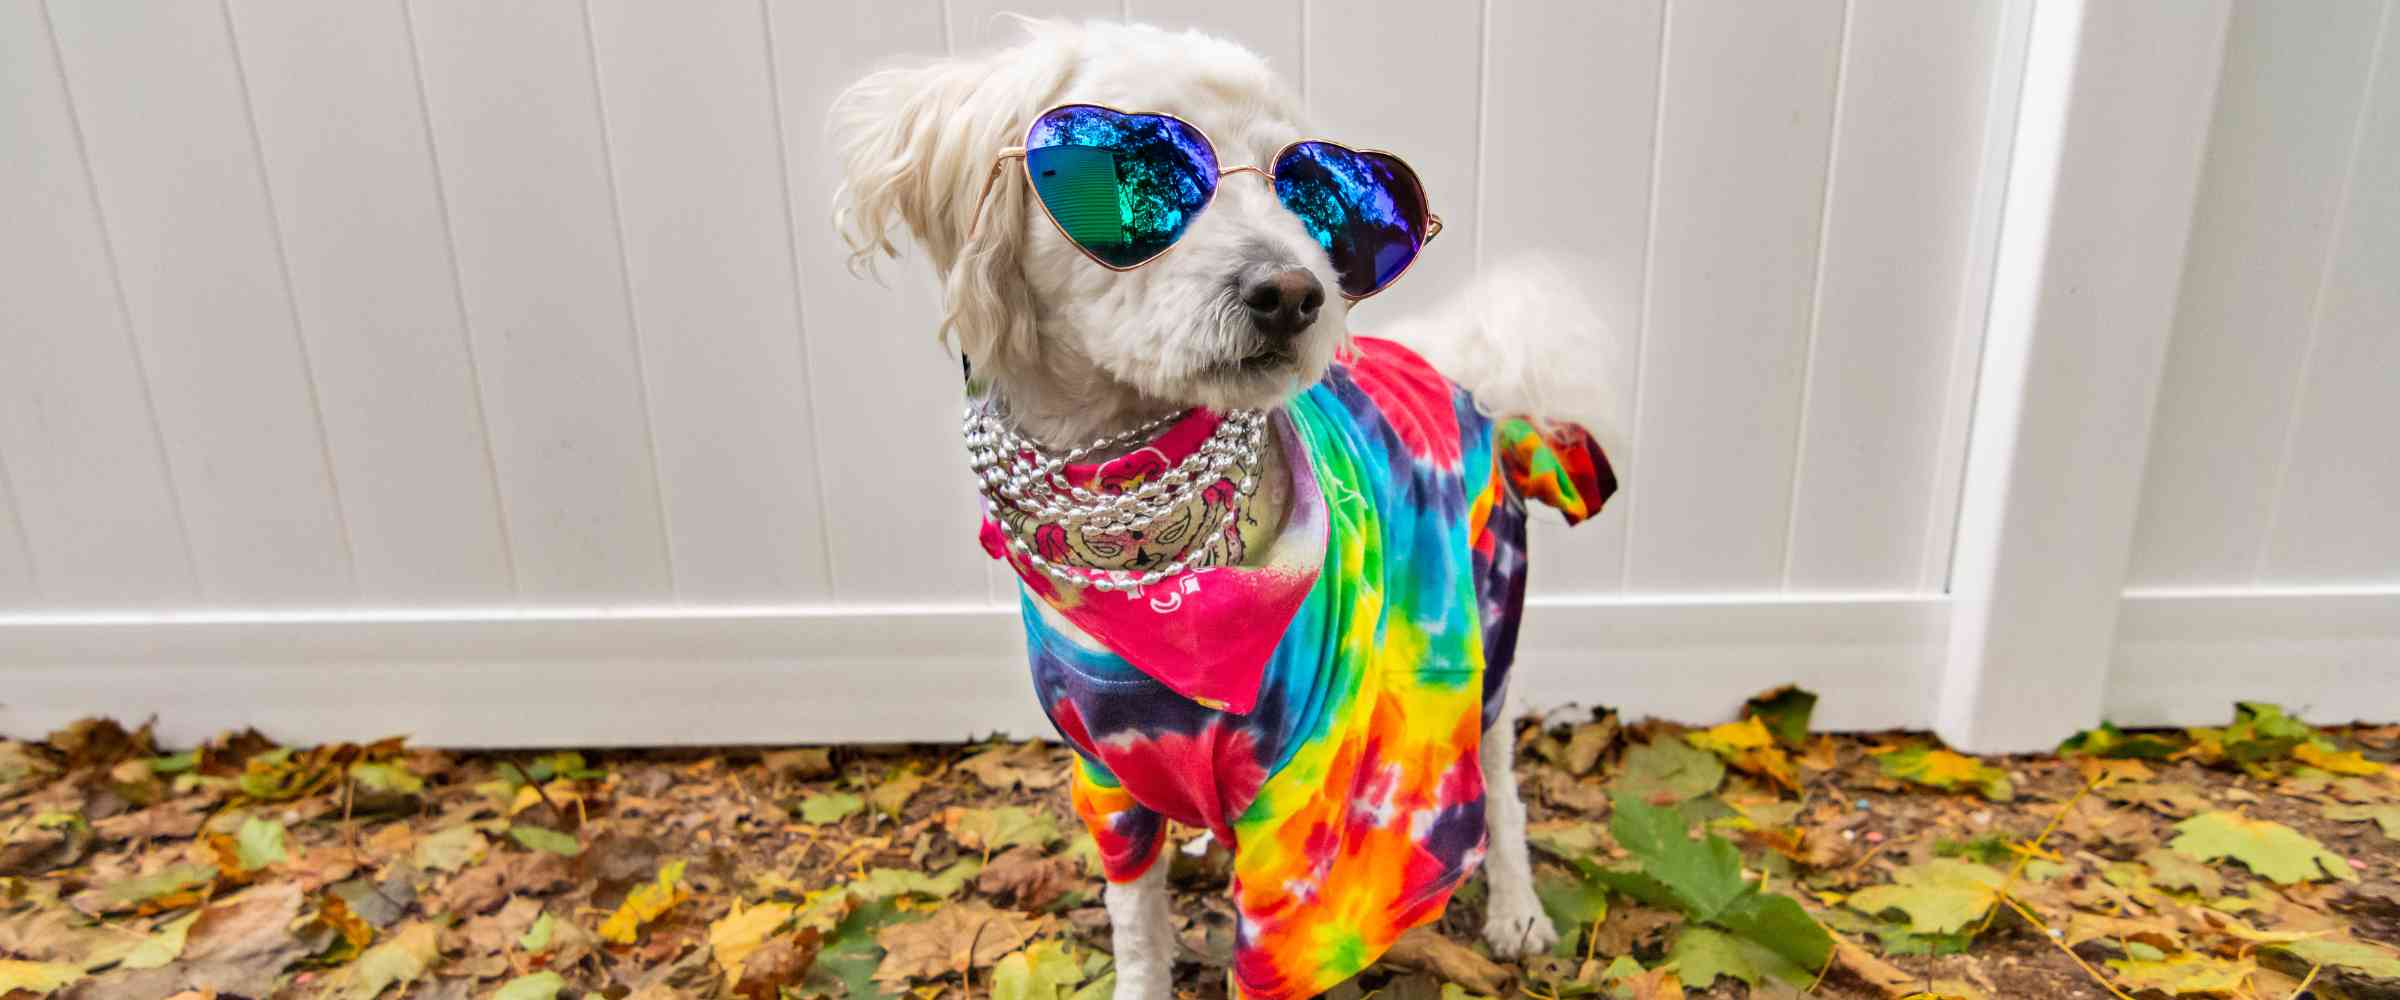 Bichon Frise and Maltese wearing a Tie Dye Shirt, Sunglasses and Chain accessories.